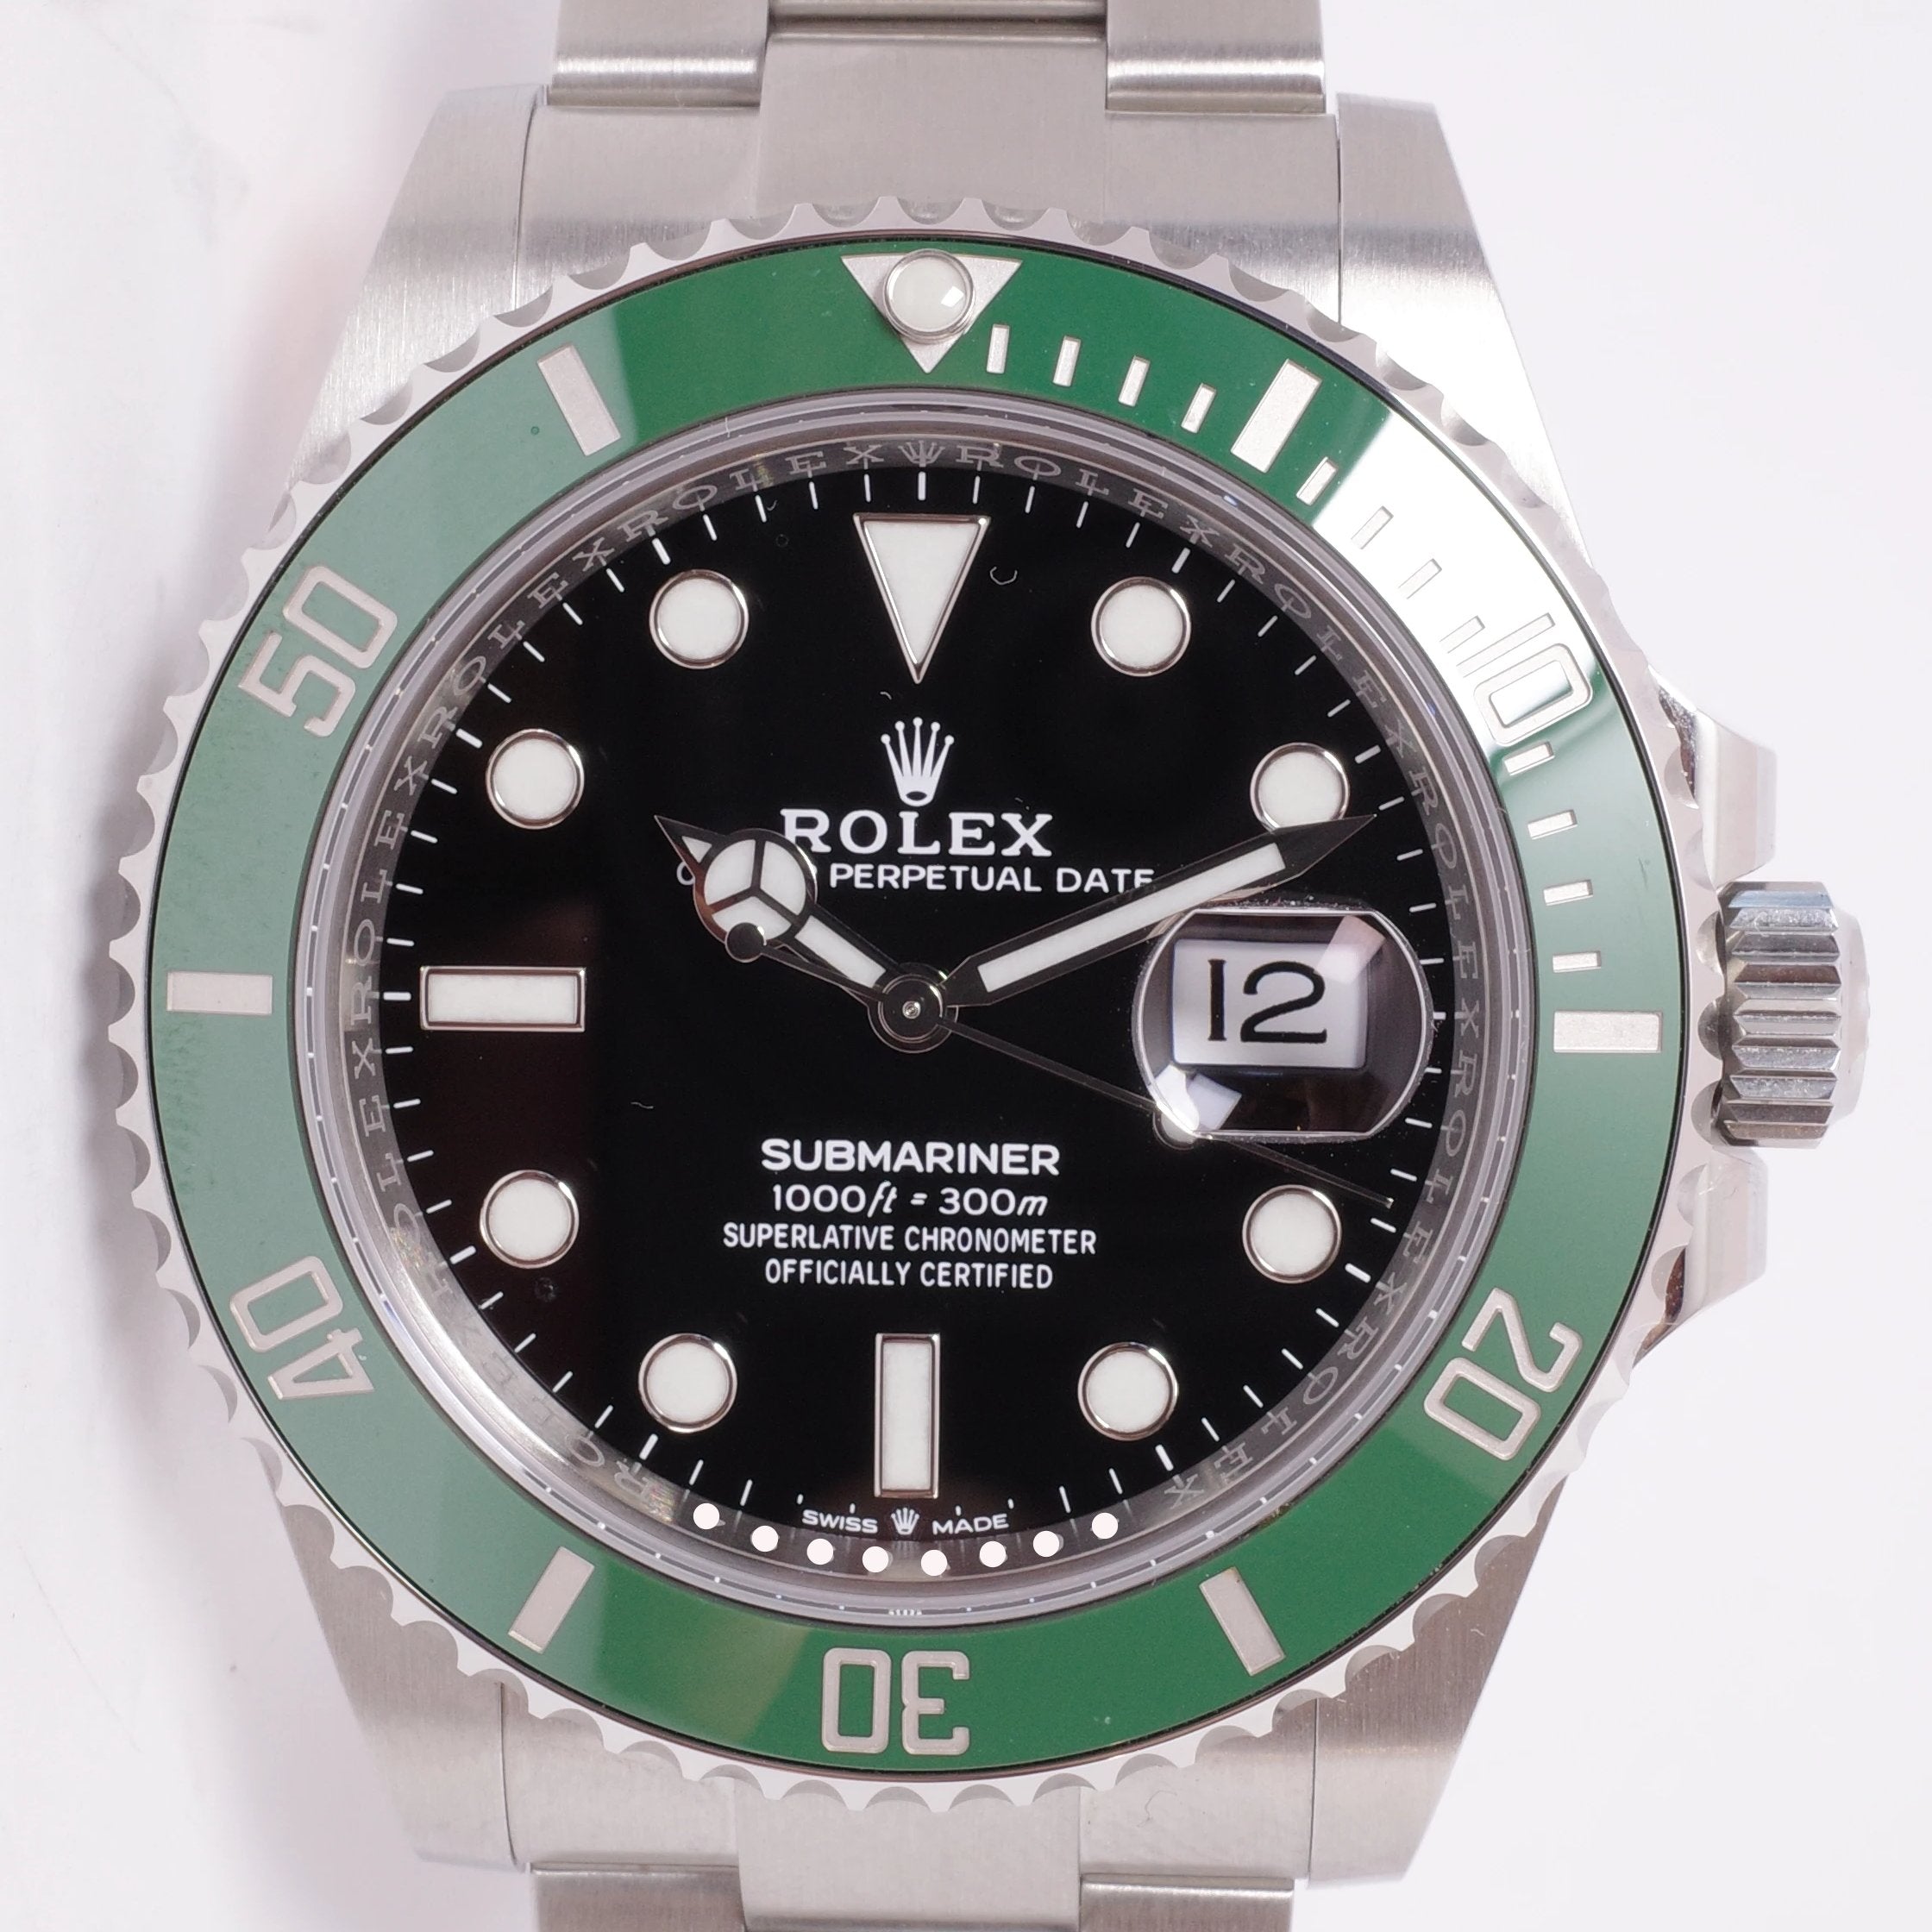 Rolex Submariner Date Kermit Cermit Starbucks 41mm 126610lv Green for  $16,977 for sale from a Trusted Seller on Chrono24